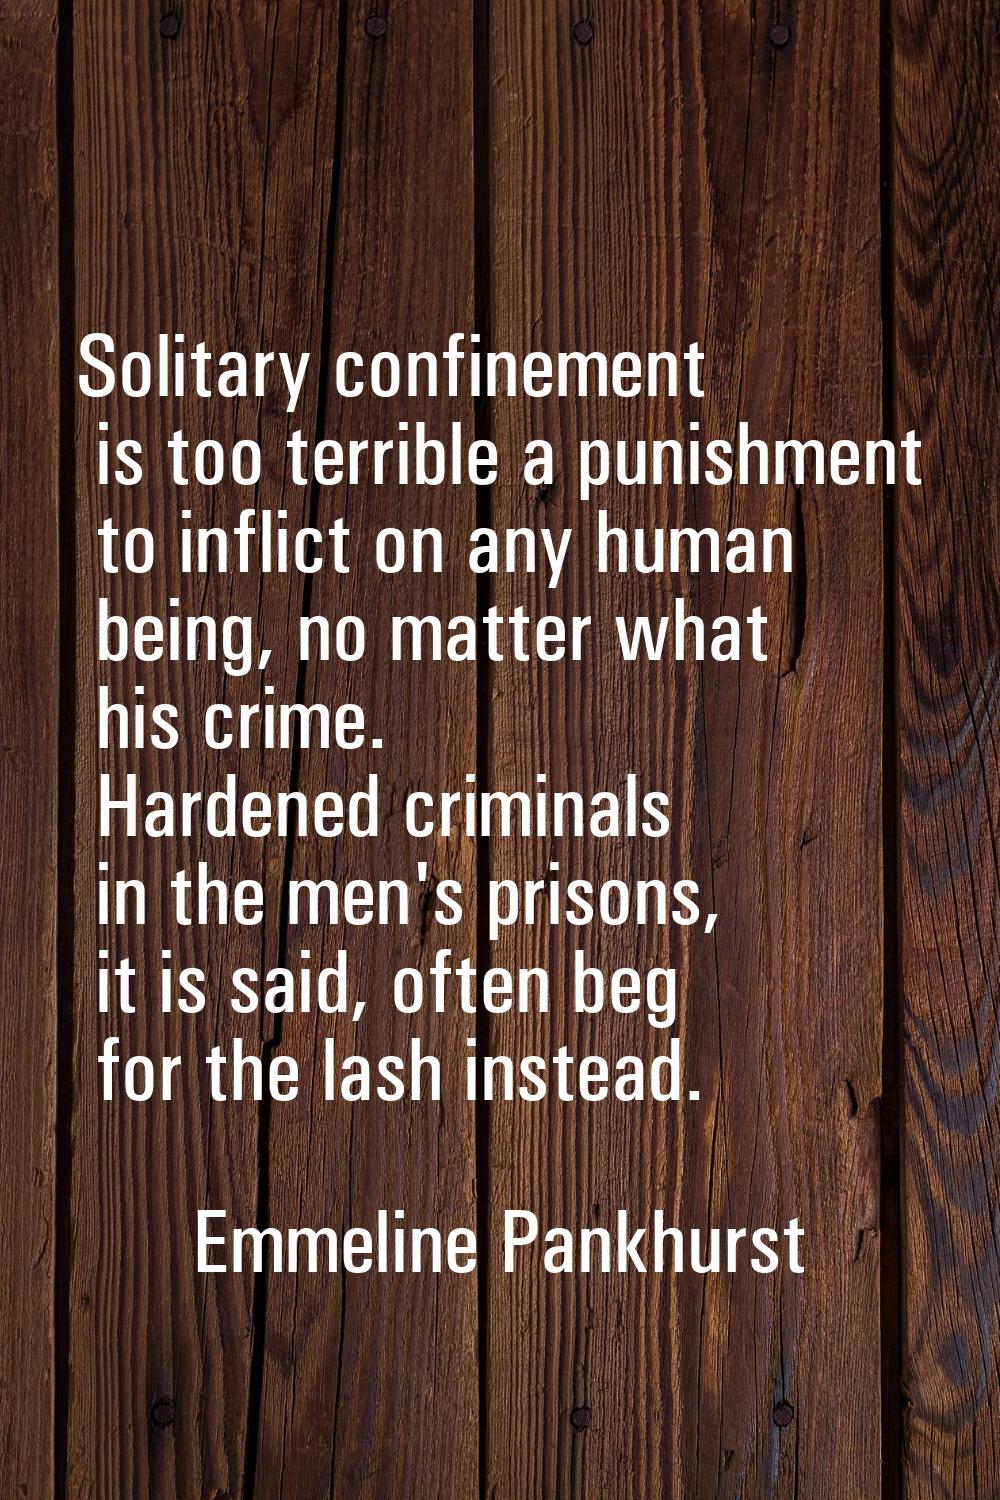 Solitary confinement is too terrible a punishment to inflict on any human being, no matter what his